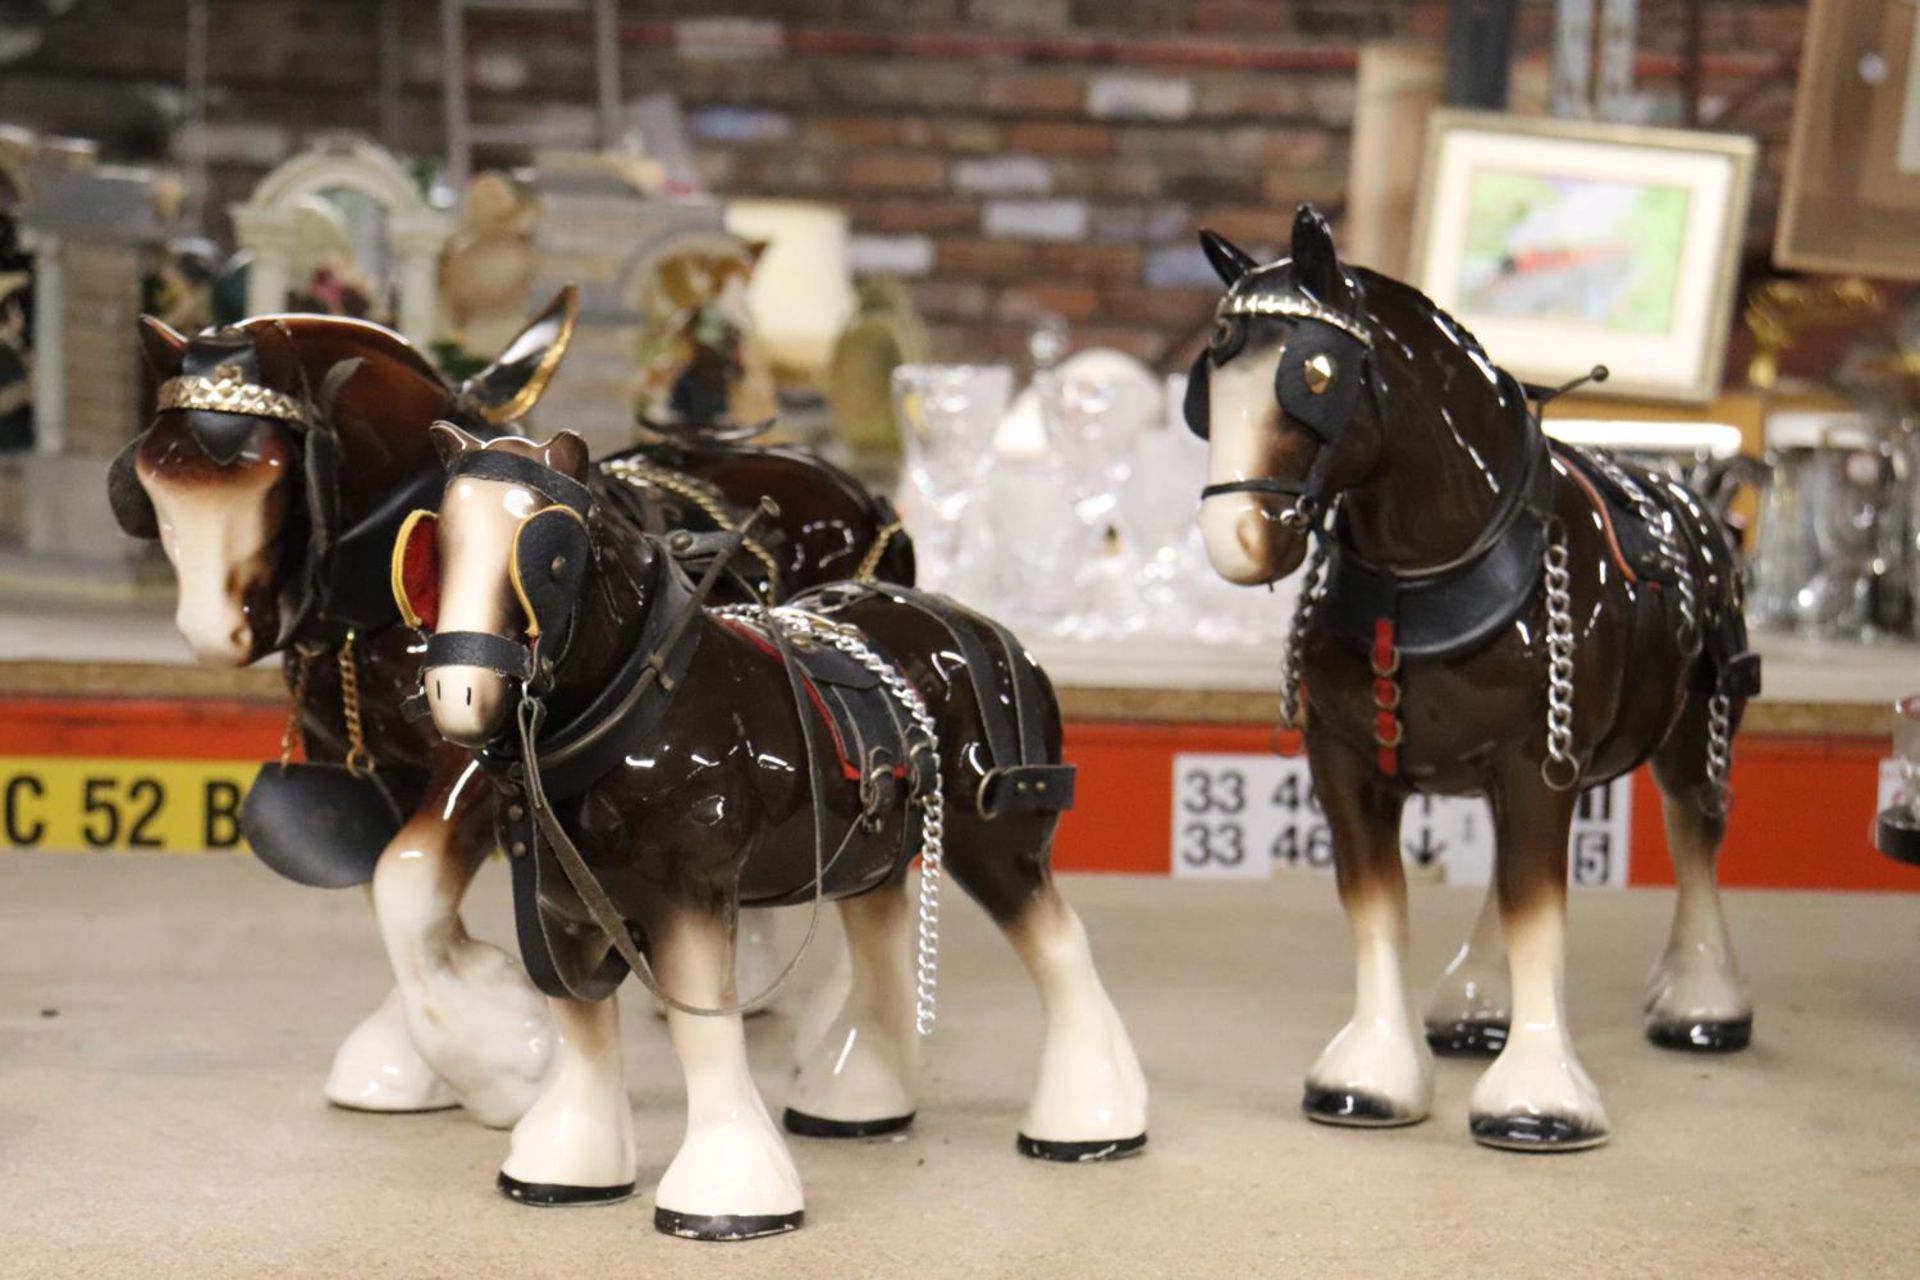 THREE LARGE CERAMIC SHIRE HORSE FIGURES WITH HARNESSES